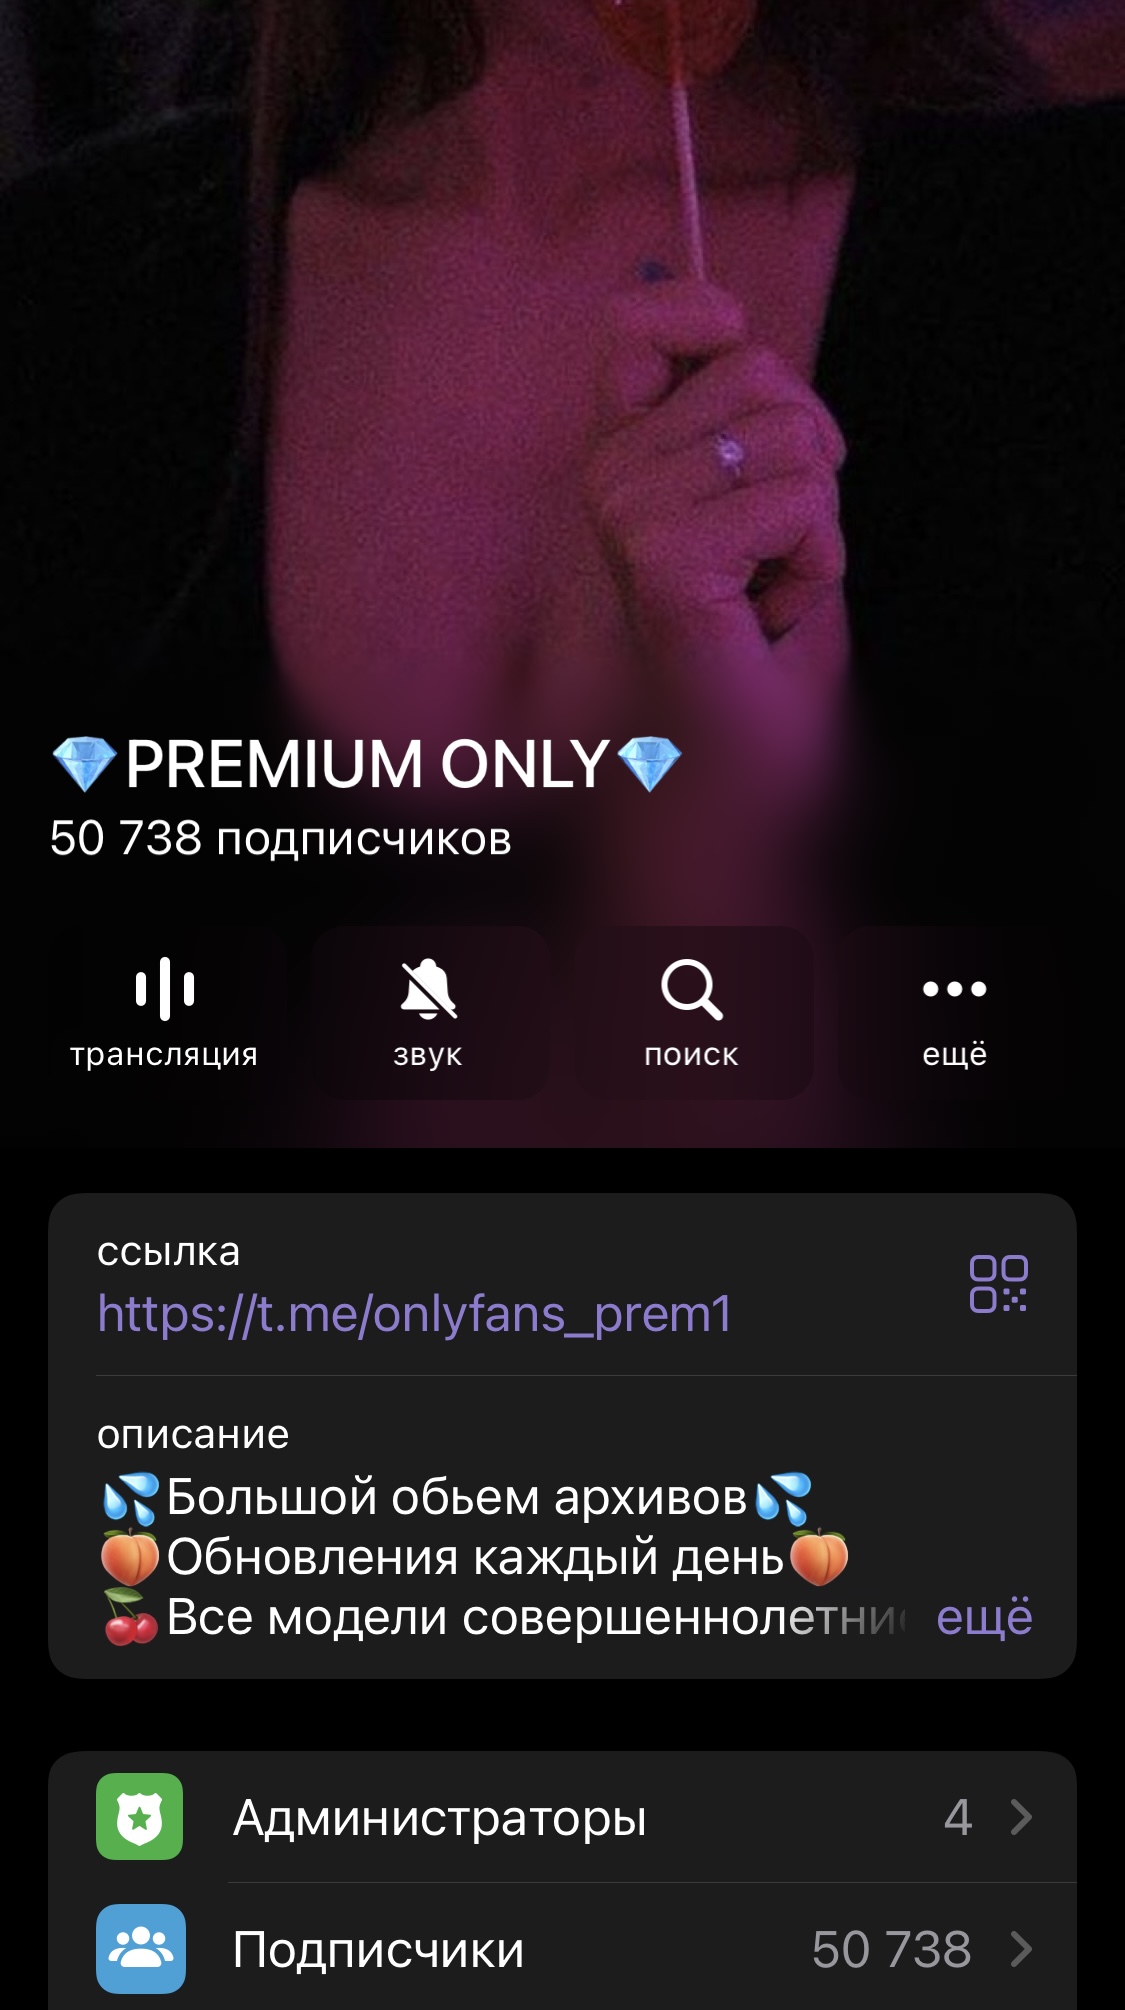 Channel about girls from Onlyfans